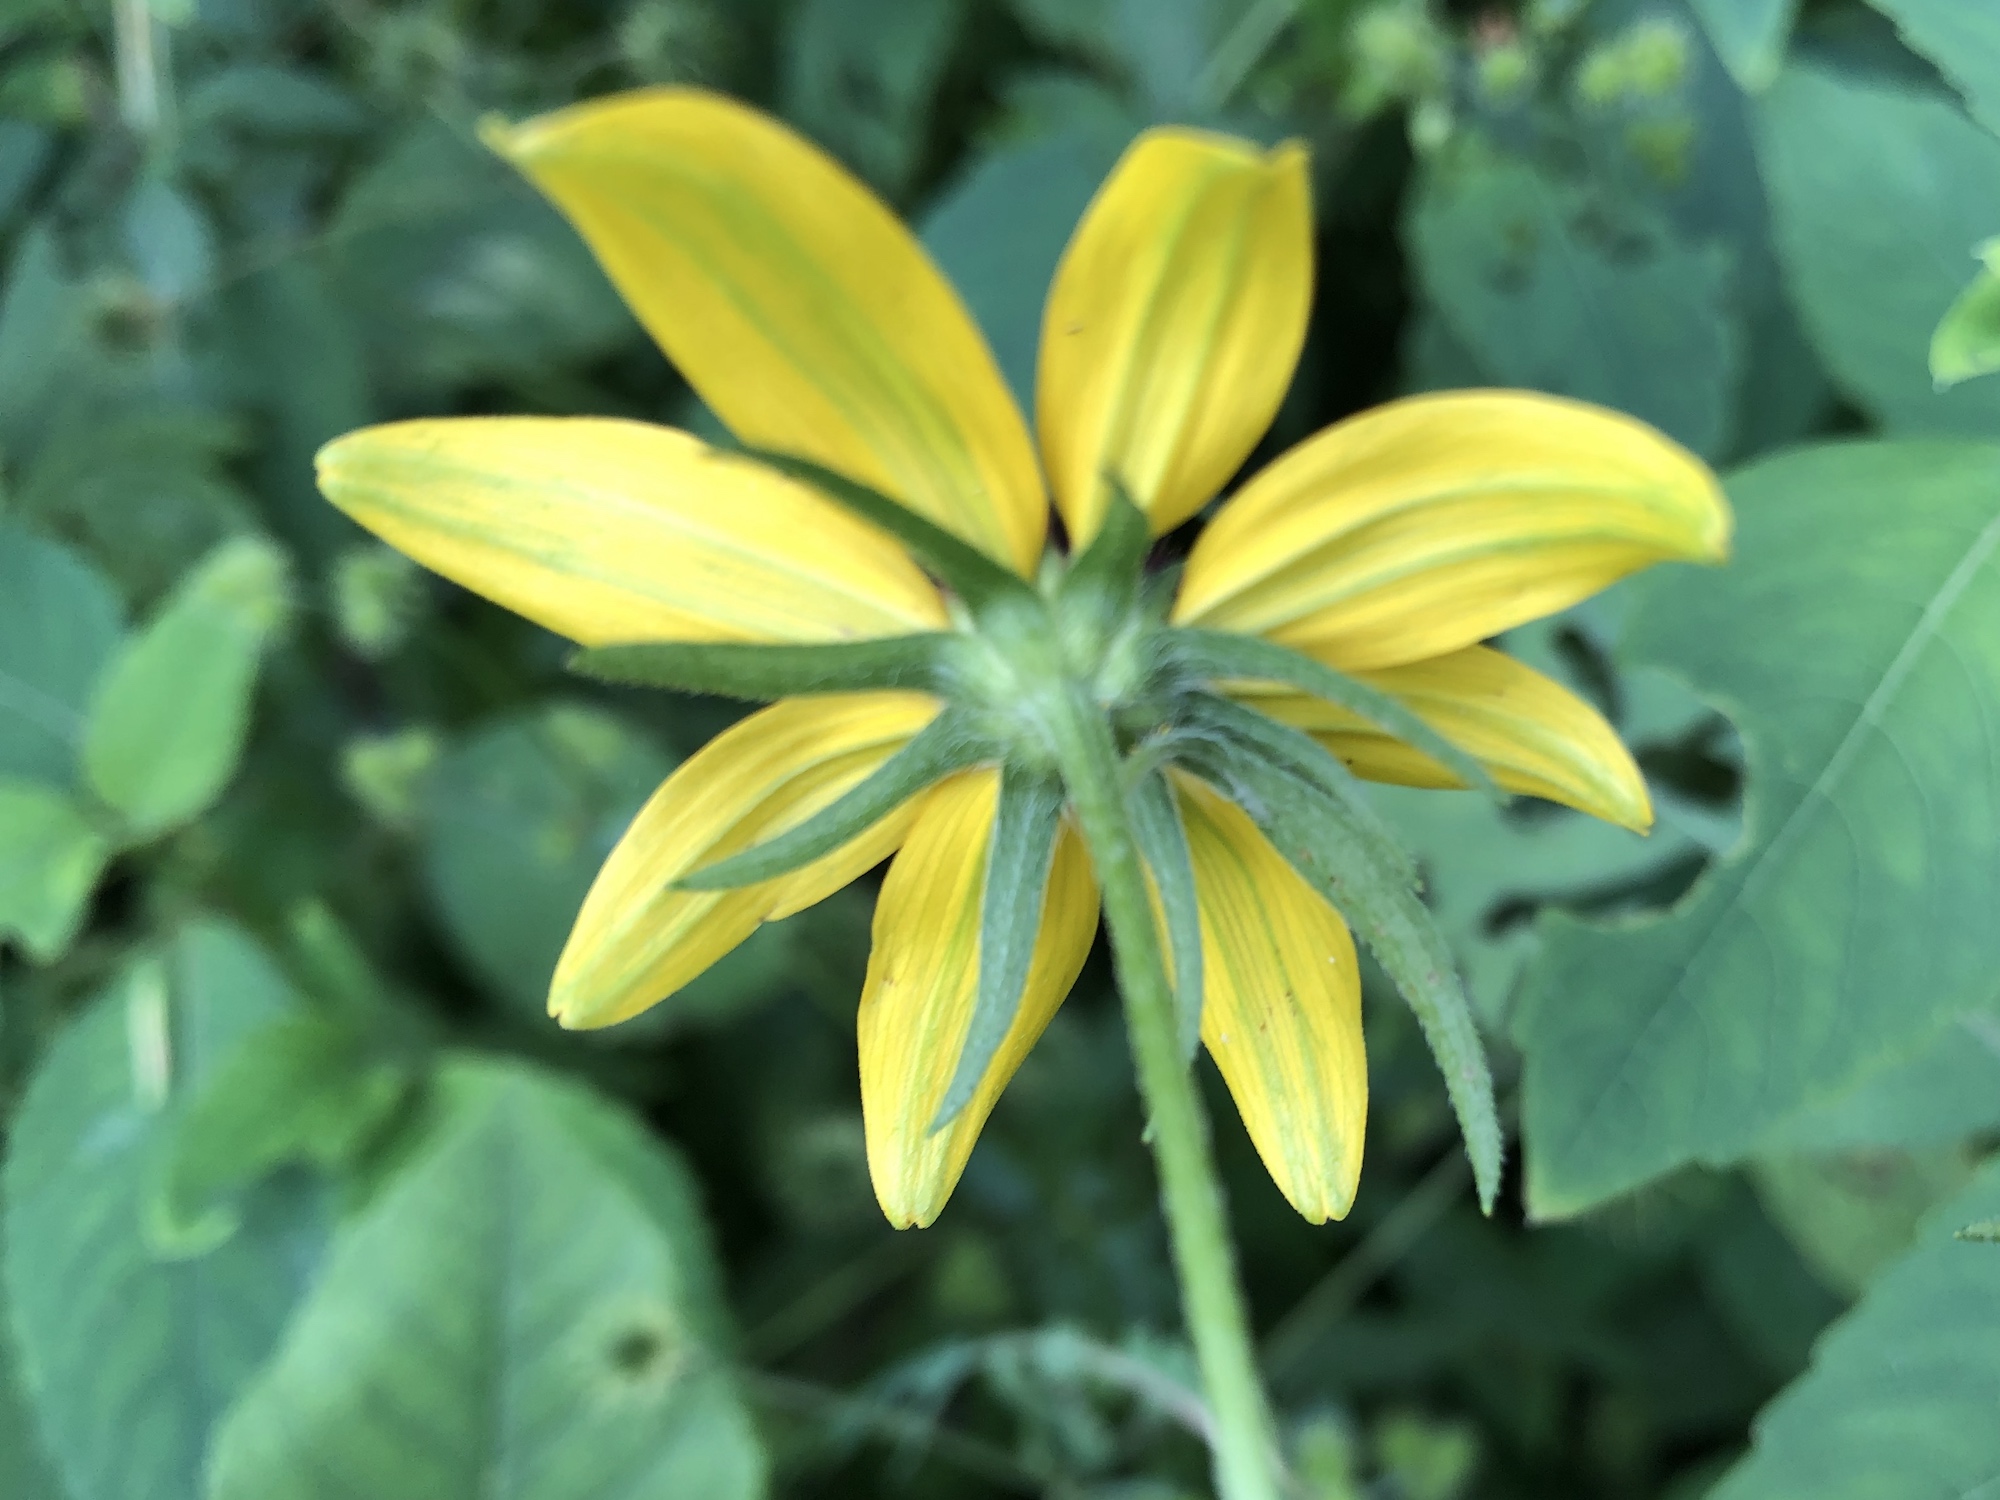 Brown-eyed Susan on banks of Marion Dunn Pond in Madison, Wisconsin on July 25, 2019.